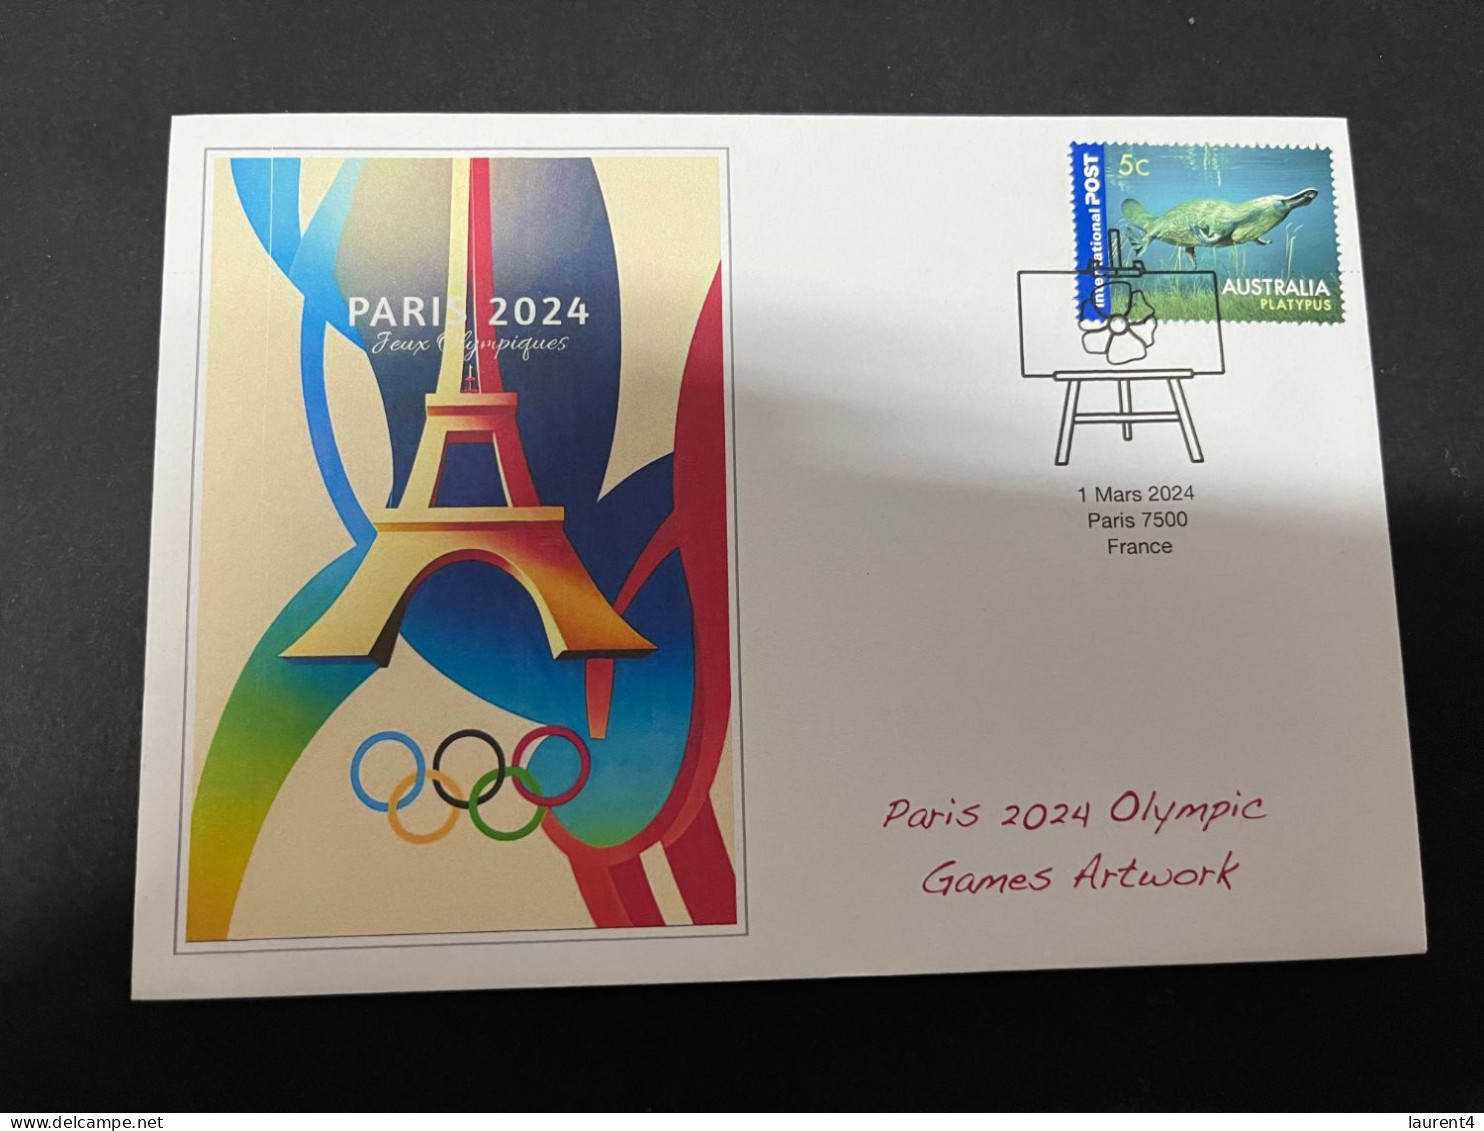 9-3-2024 (2 Y 33) Paris Olympic Games 2024 - 3 (of 12 Covers Series) For The Paris 2024 Olympic Games Artwork - Sommer 2024: Paris